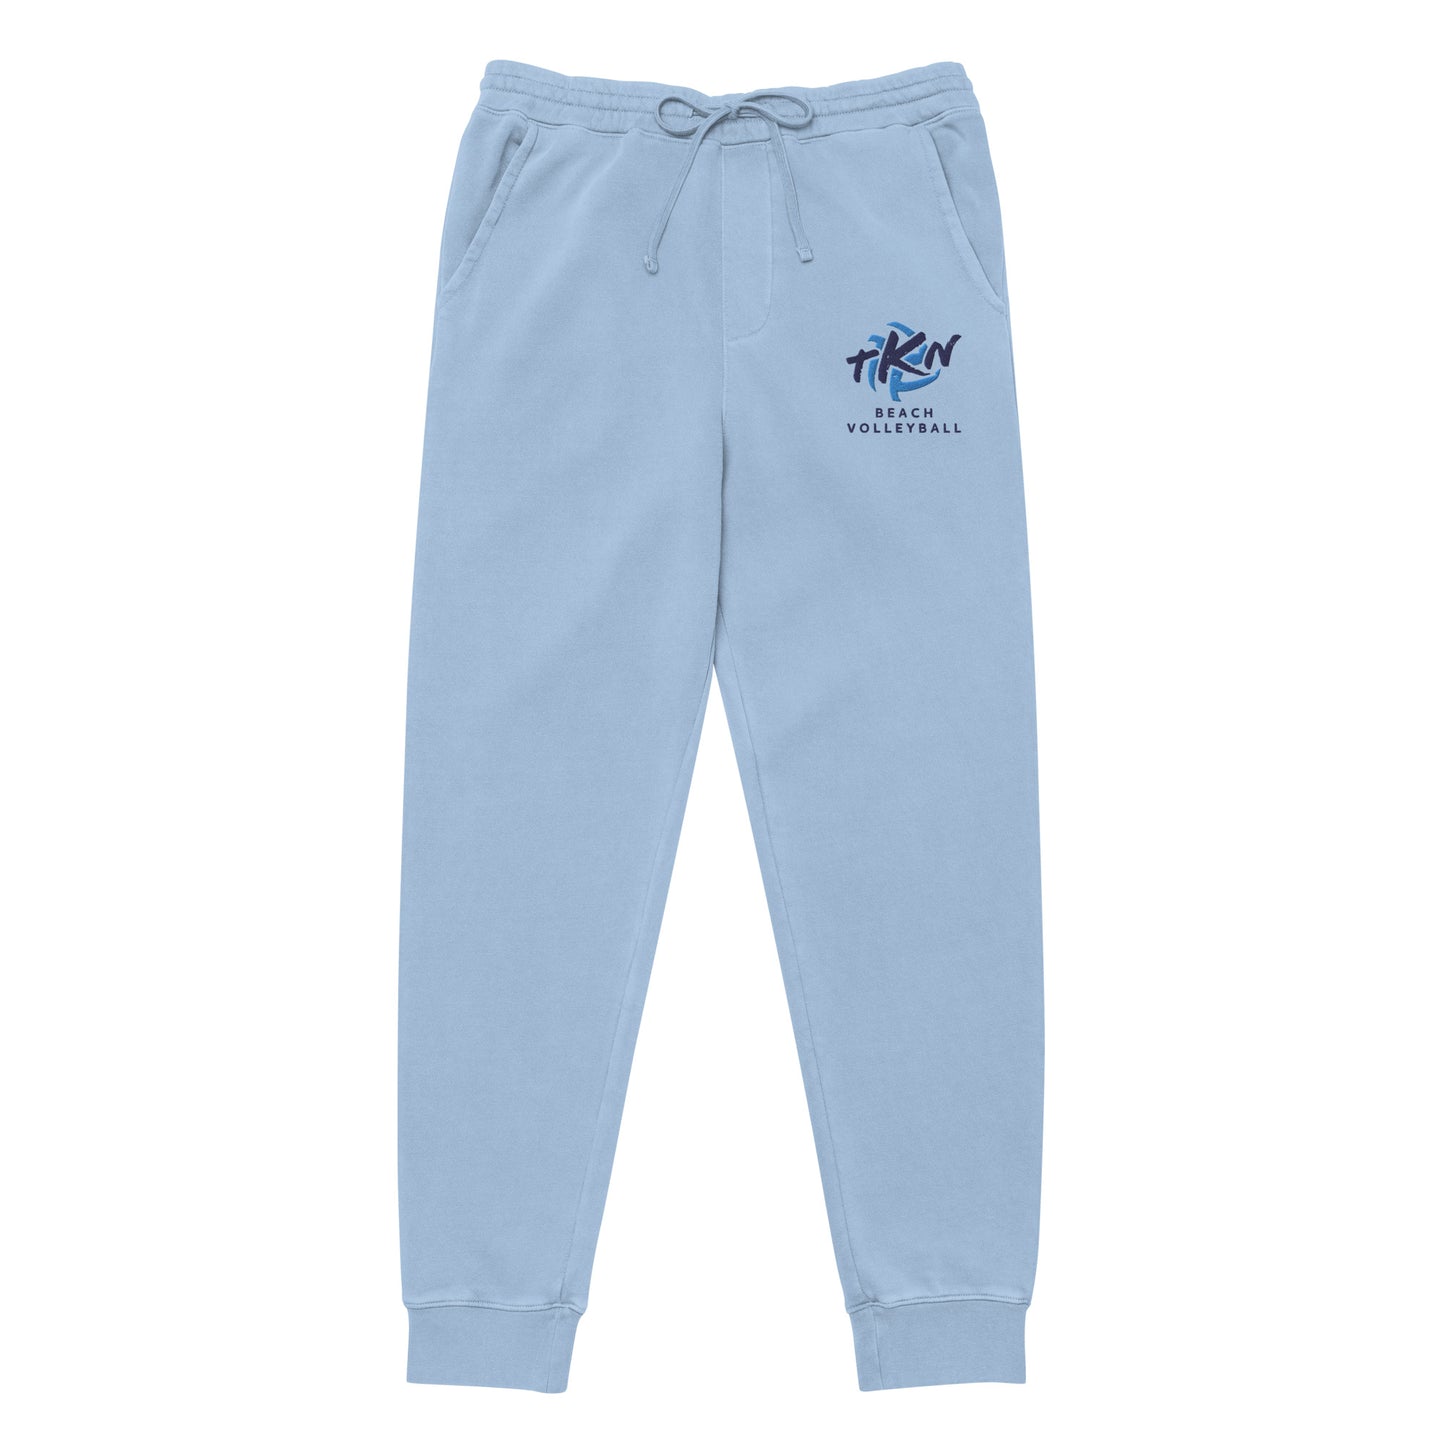 TKN Embroidered Unisex pigment-dyed sweatpants